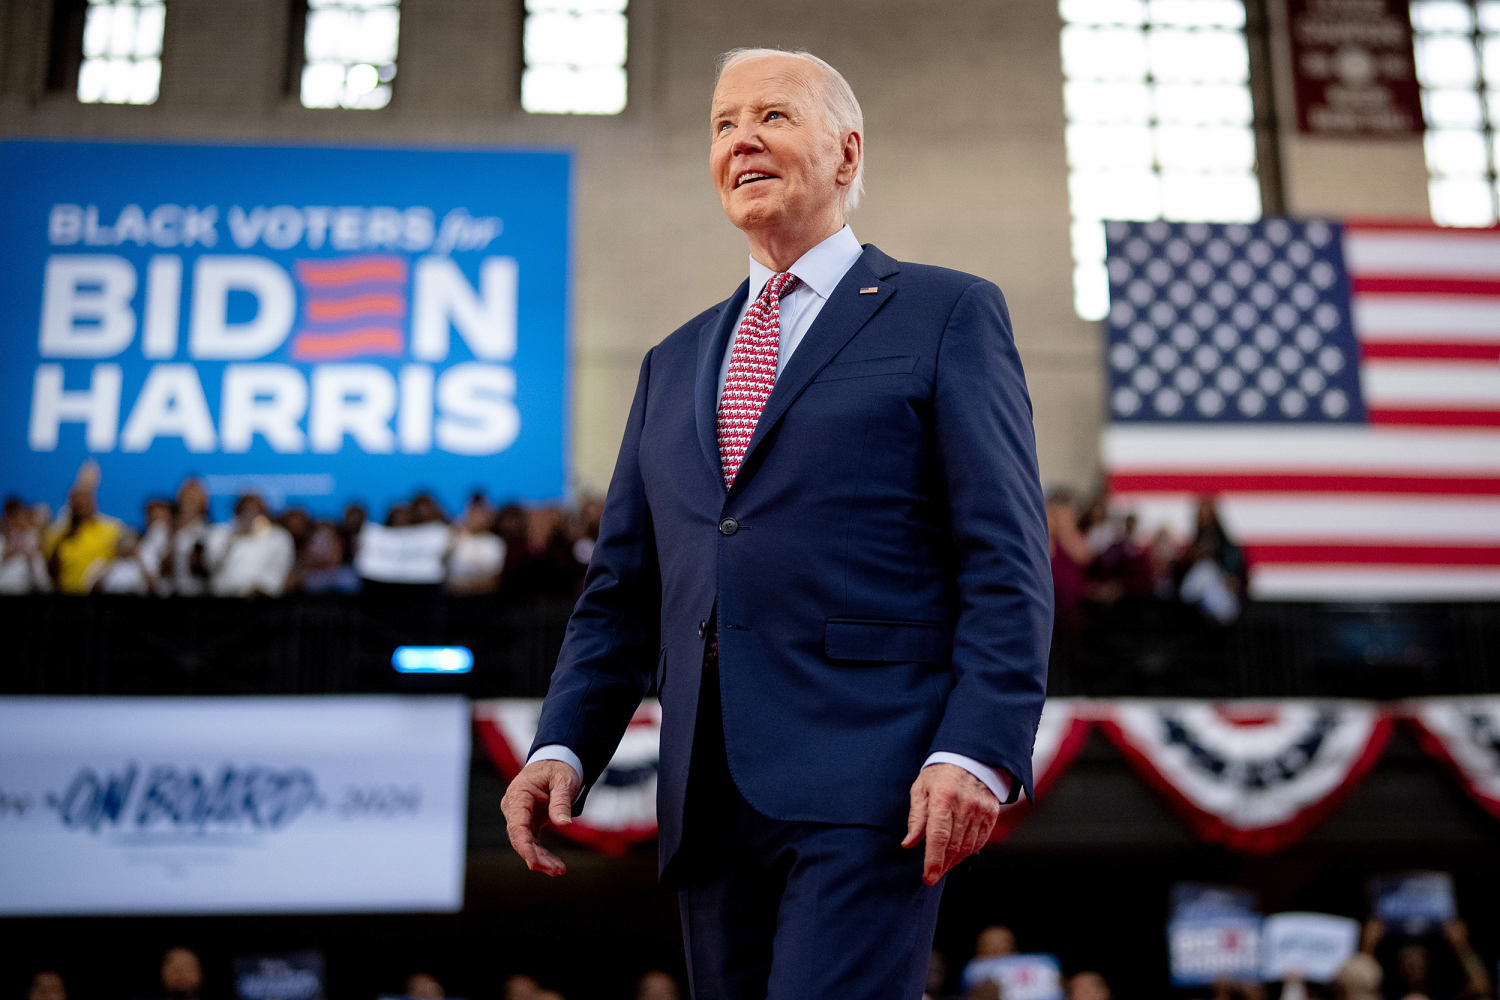 Among Biden’s challenges: voters who don’t know they’re on his side